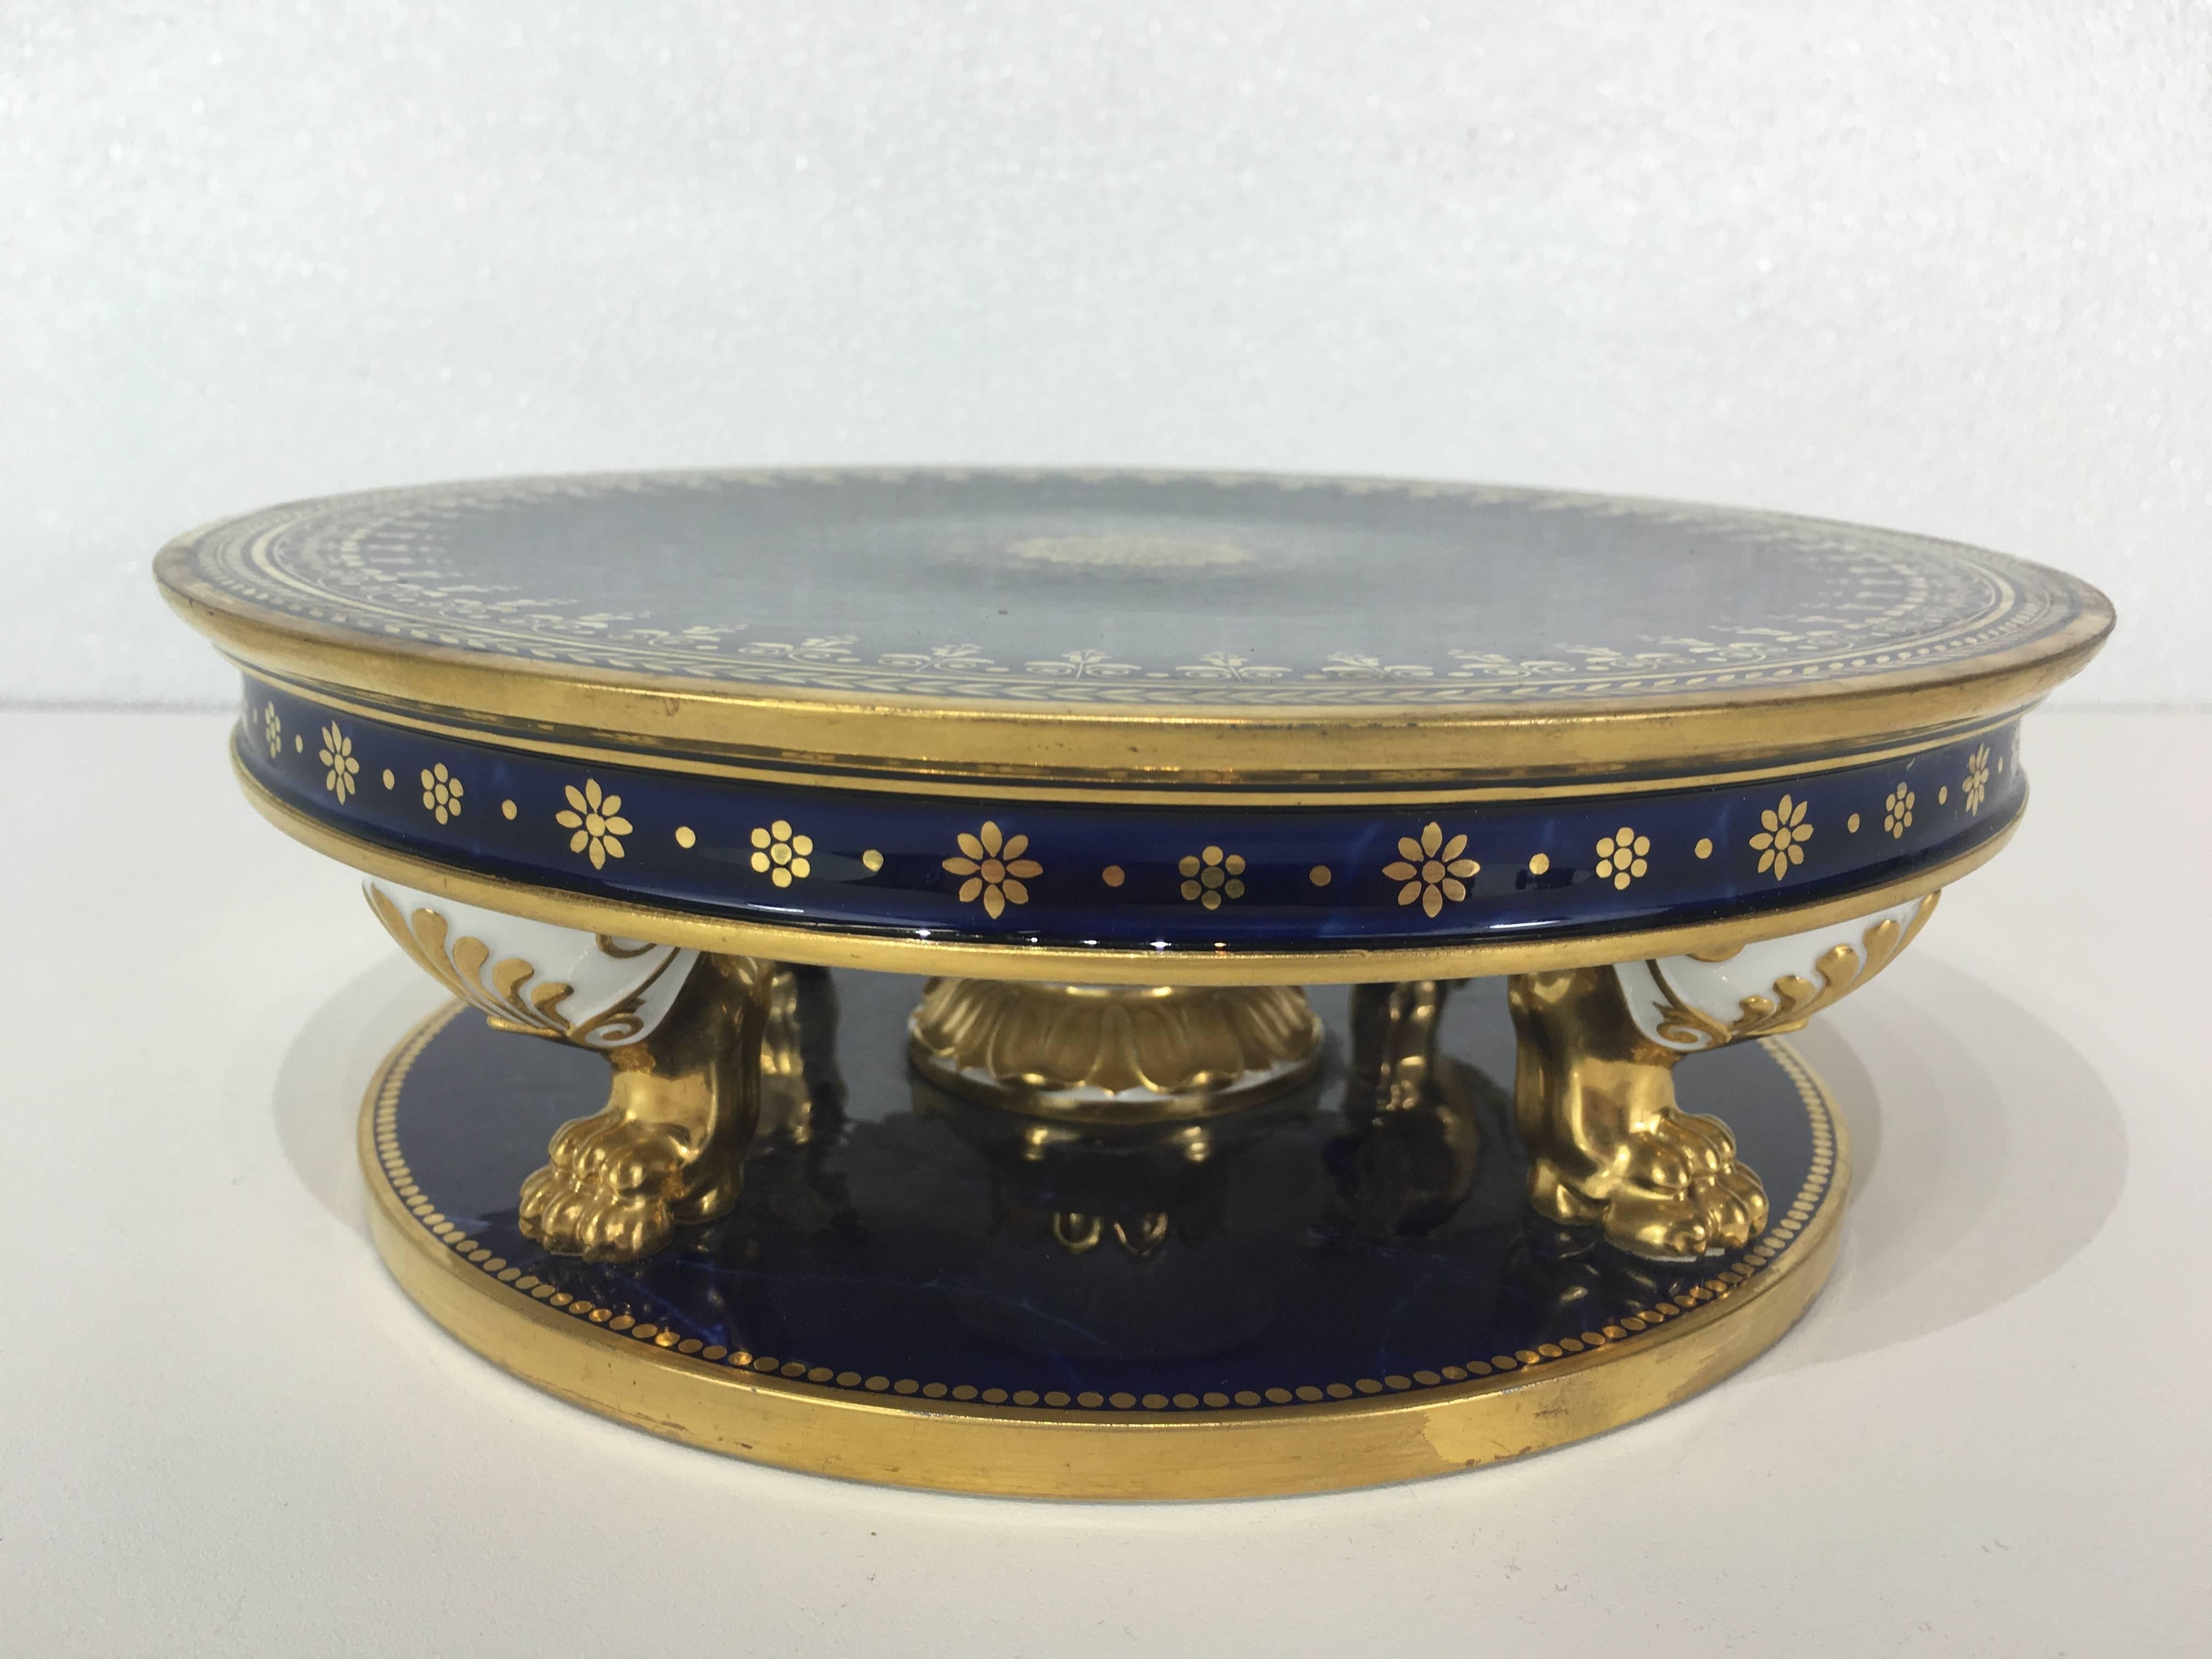 French Sevres Tazza or Plateau